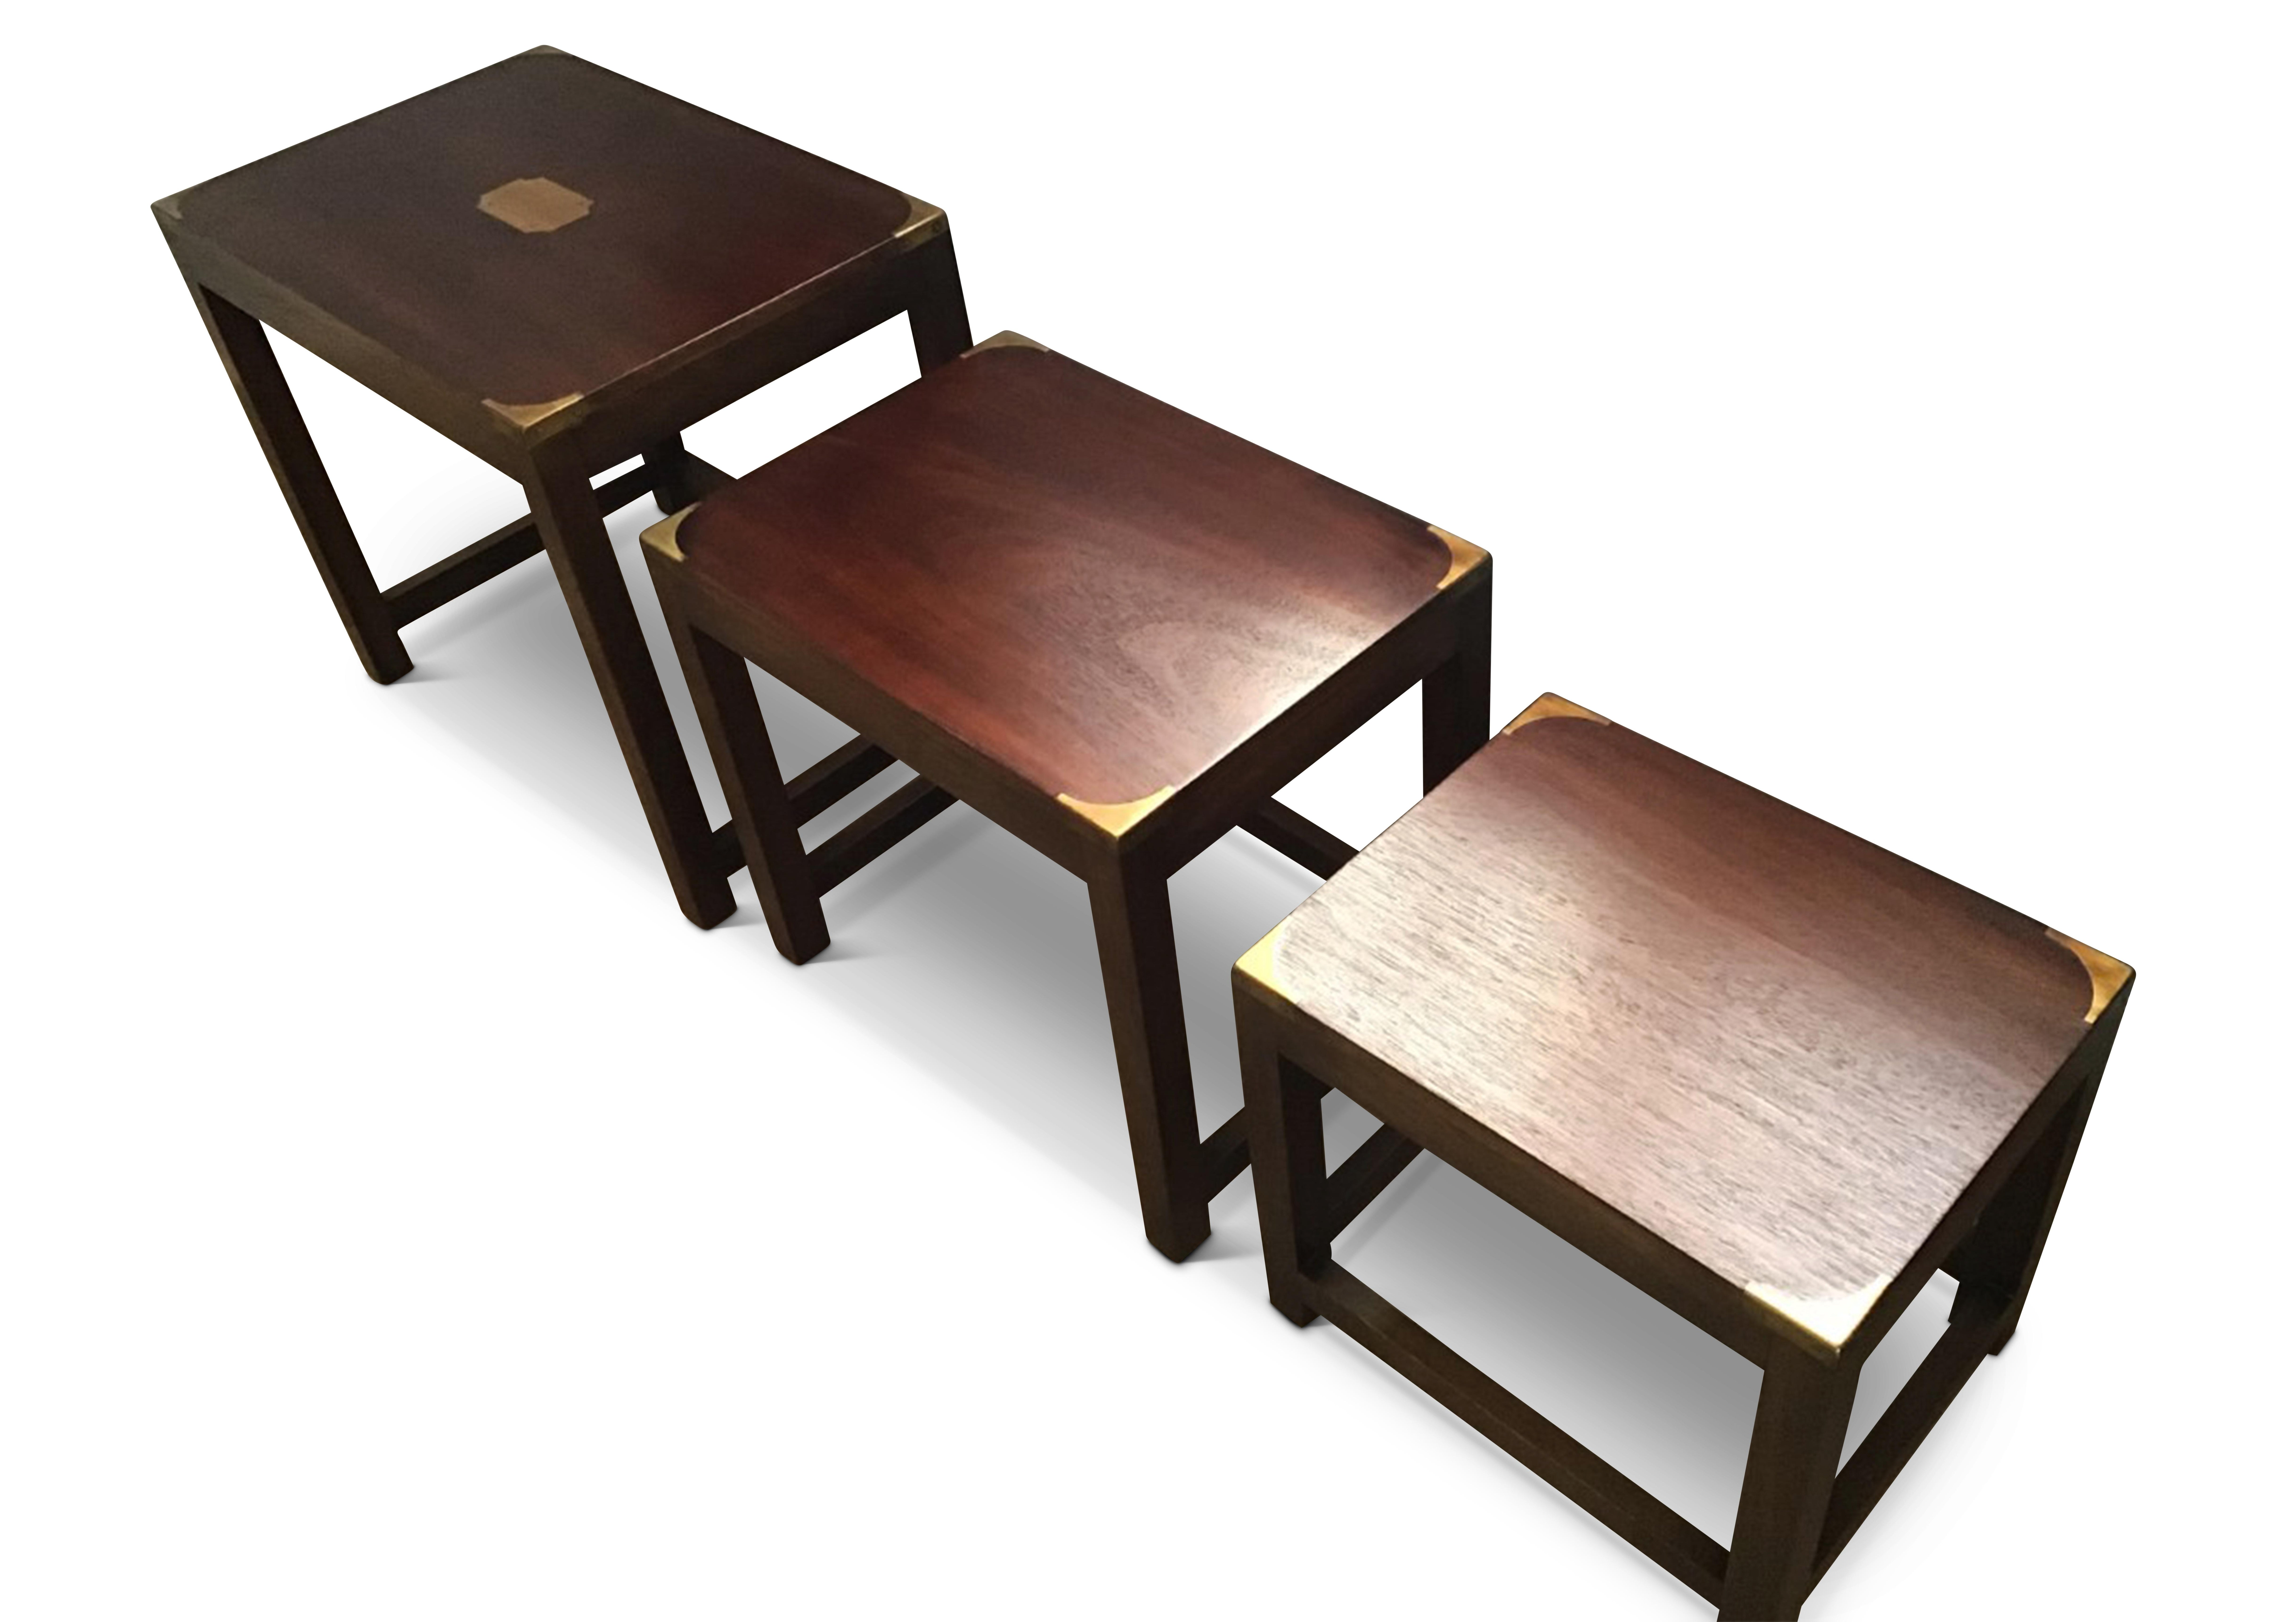 A Set of Three Tables by Kennedy for Harrods of London Department Store.
Harrods sold Kennedy Furniture for over 87 years.

Military Campaign Nesting Tables With Brass Indents and Mounts. 
The REH Kennedy Military Range. This collection takes